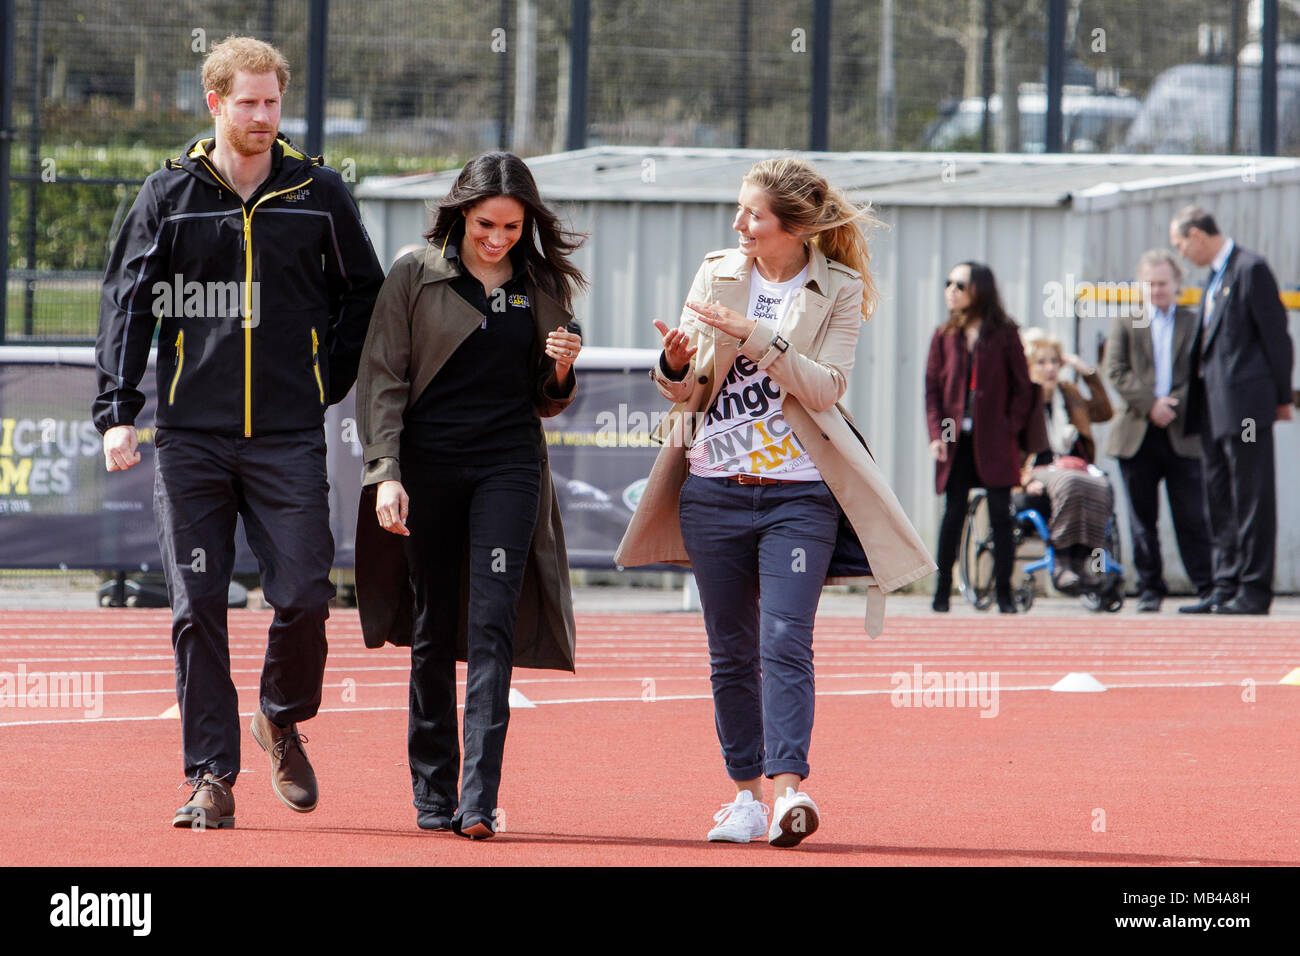 Bath, UK. 6th April, 2018. Prince Harry (L), Meghan Markle (centre) are pictured talking to the Invictus Games UK Team Chef de Mission Jayne Kavanagh (R) at the University of Bath Sports Training Village as they attend the UK team trials for the 2018 Invictus Games. The games are a sporting event for injured active duty and veteran service members, 500 competitors from 18 nations will compete in 11 adaptive sports in this year's Invictus Games which will be held in Sydney, Australia in October 2018. Credit: lynchpics/Alamy Live News Stock Photo